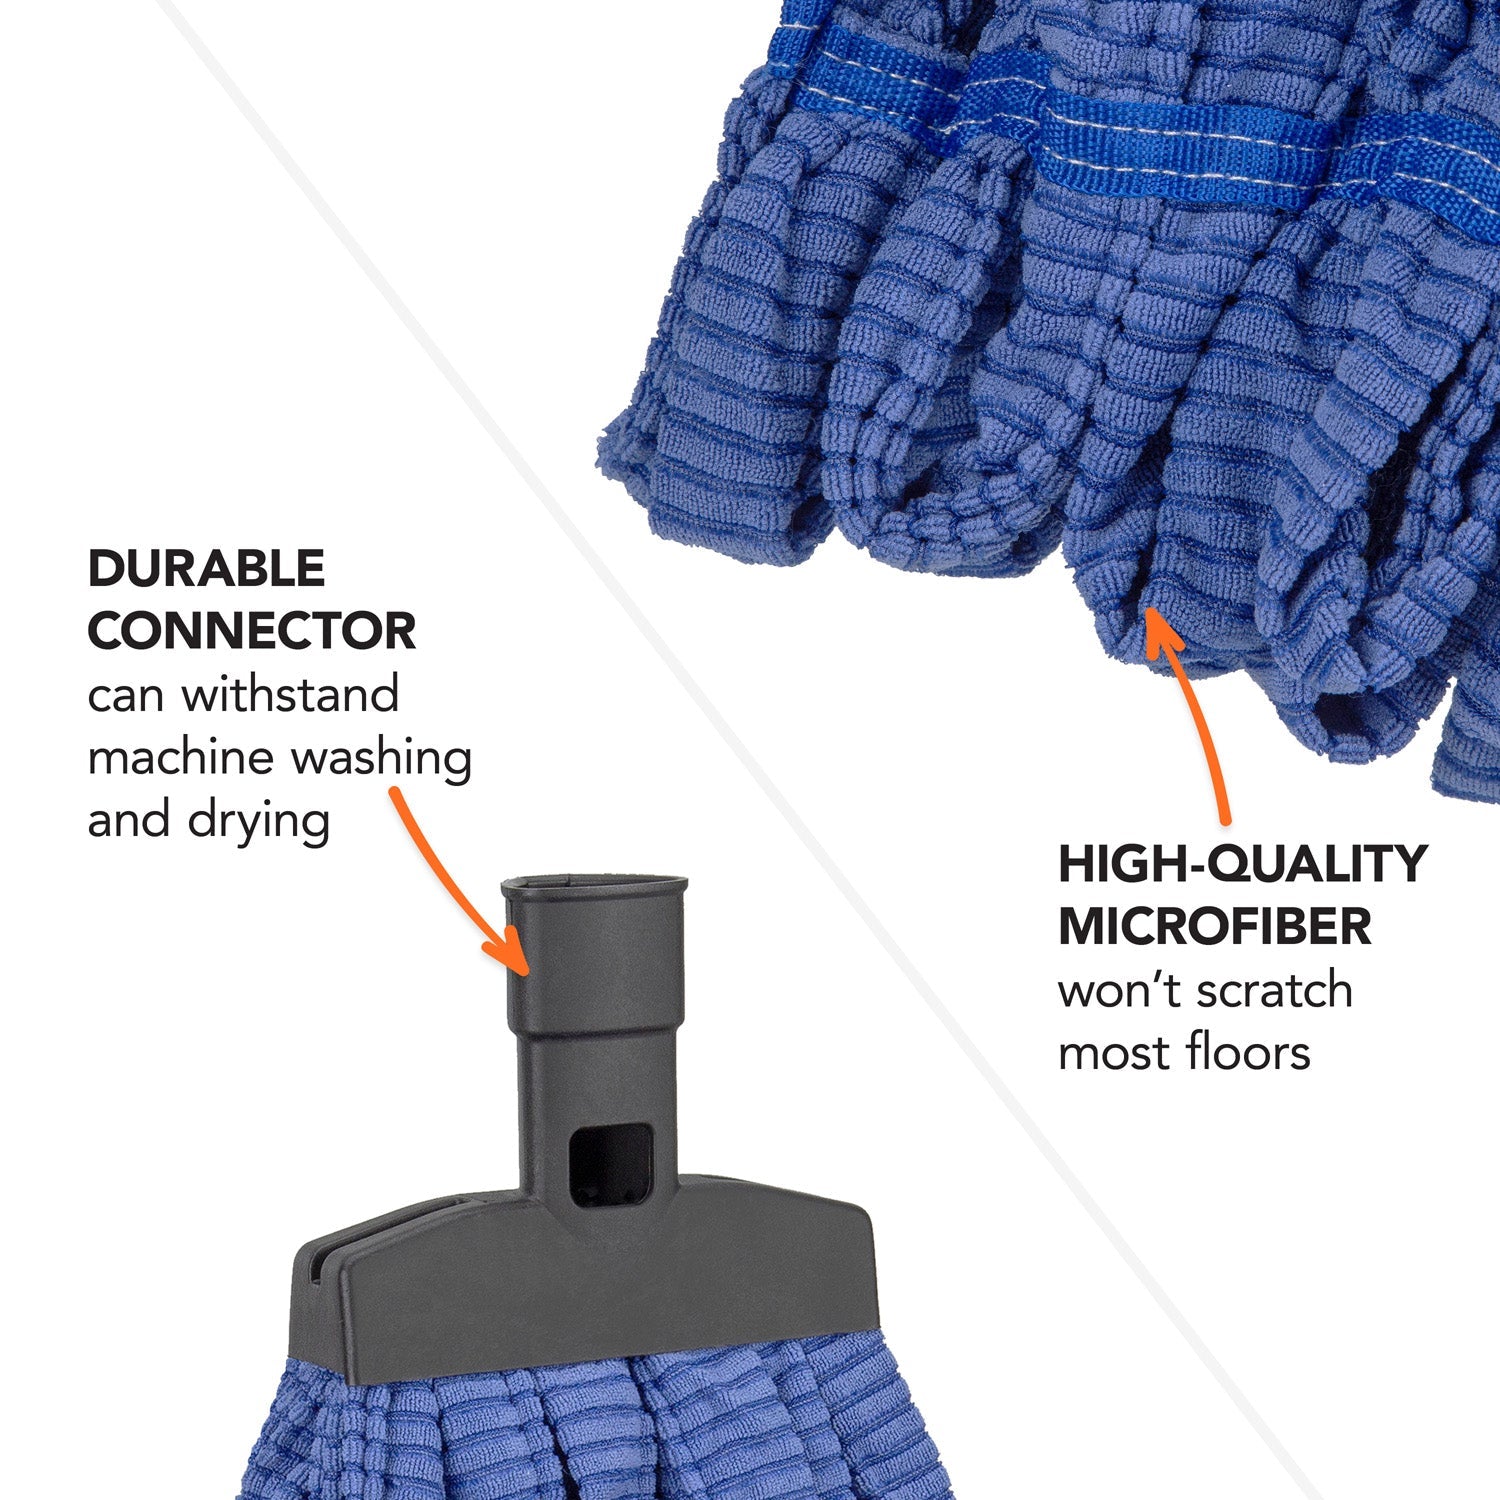  Muddy Mat® AS-SEEN-ON-TV Highly Absorbent Microfiber